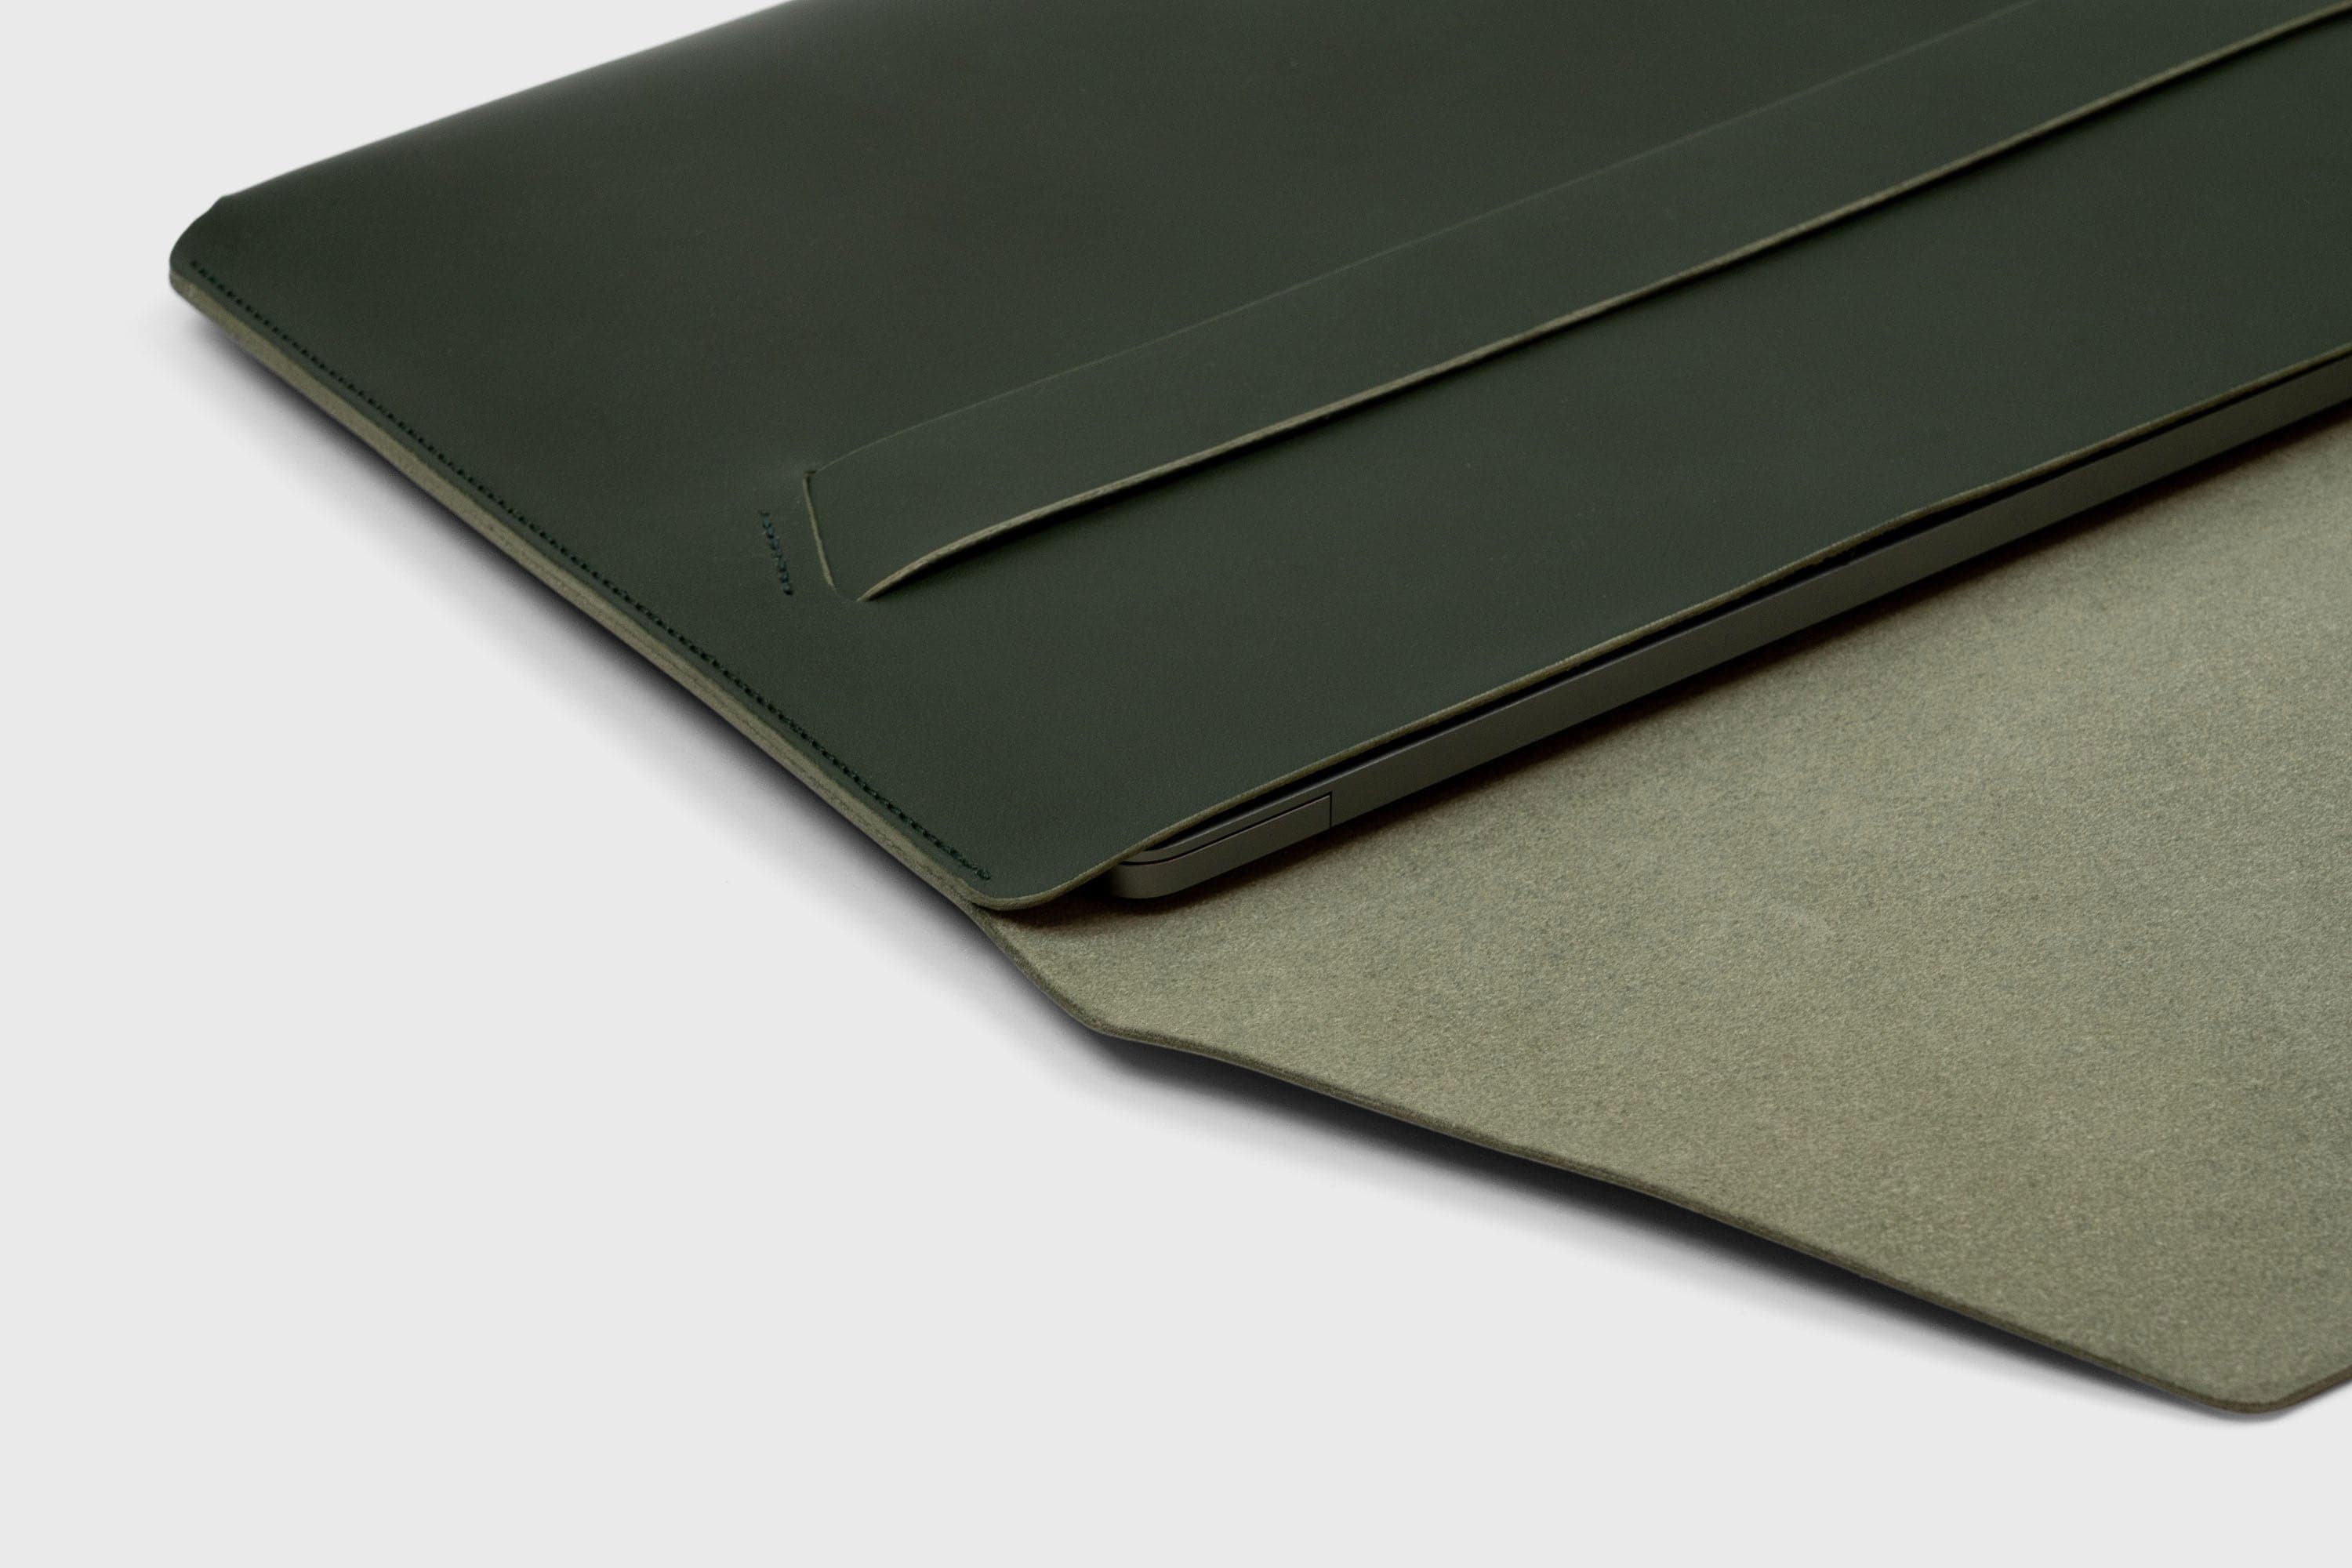 MacBook Sleeve 16 Inch Leather Dark Olive Green Artisanship Vegetable Tanned Leather Exclusive Quality Design By Manuel Dreesmann Atelier Madre Barcelona Spain